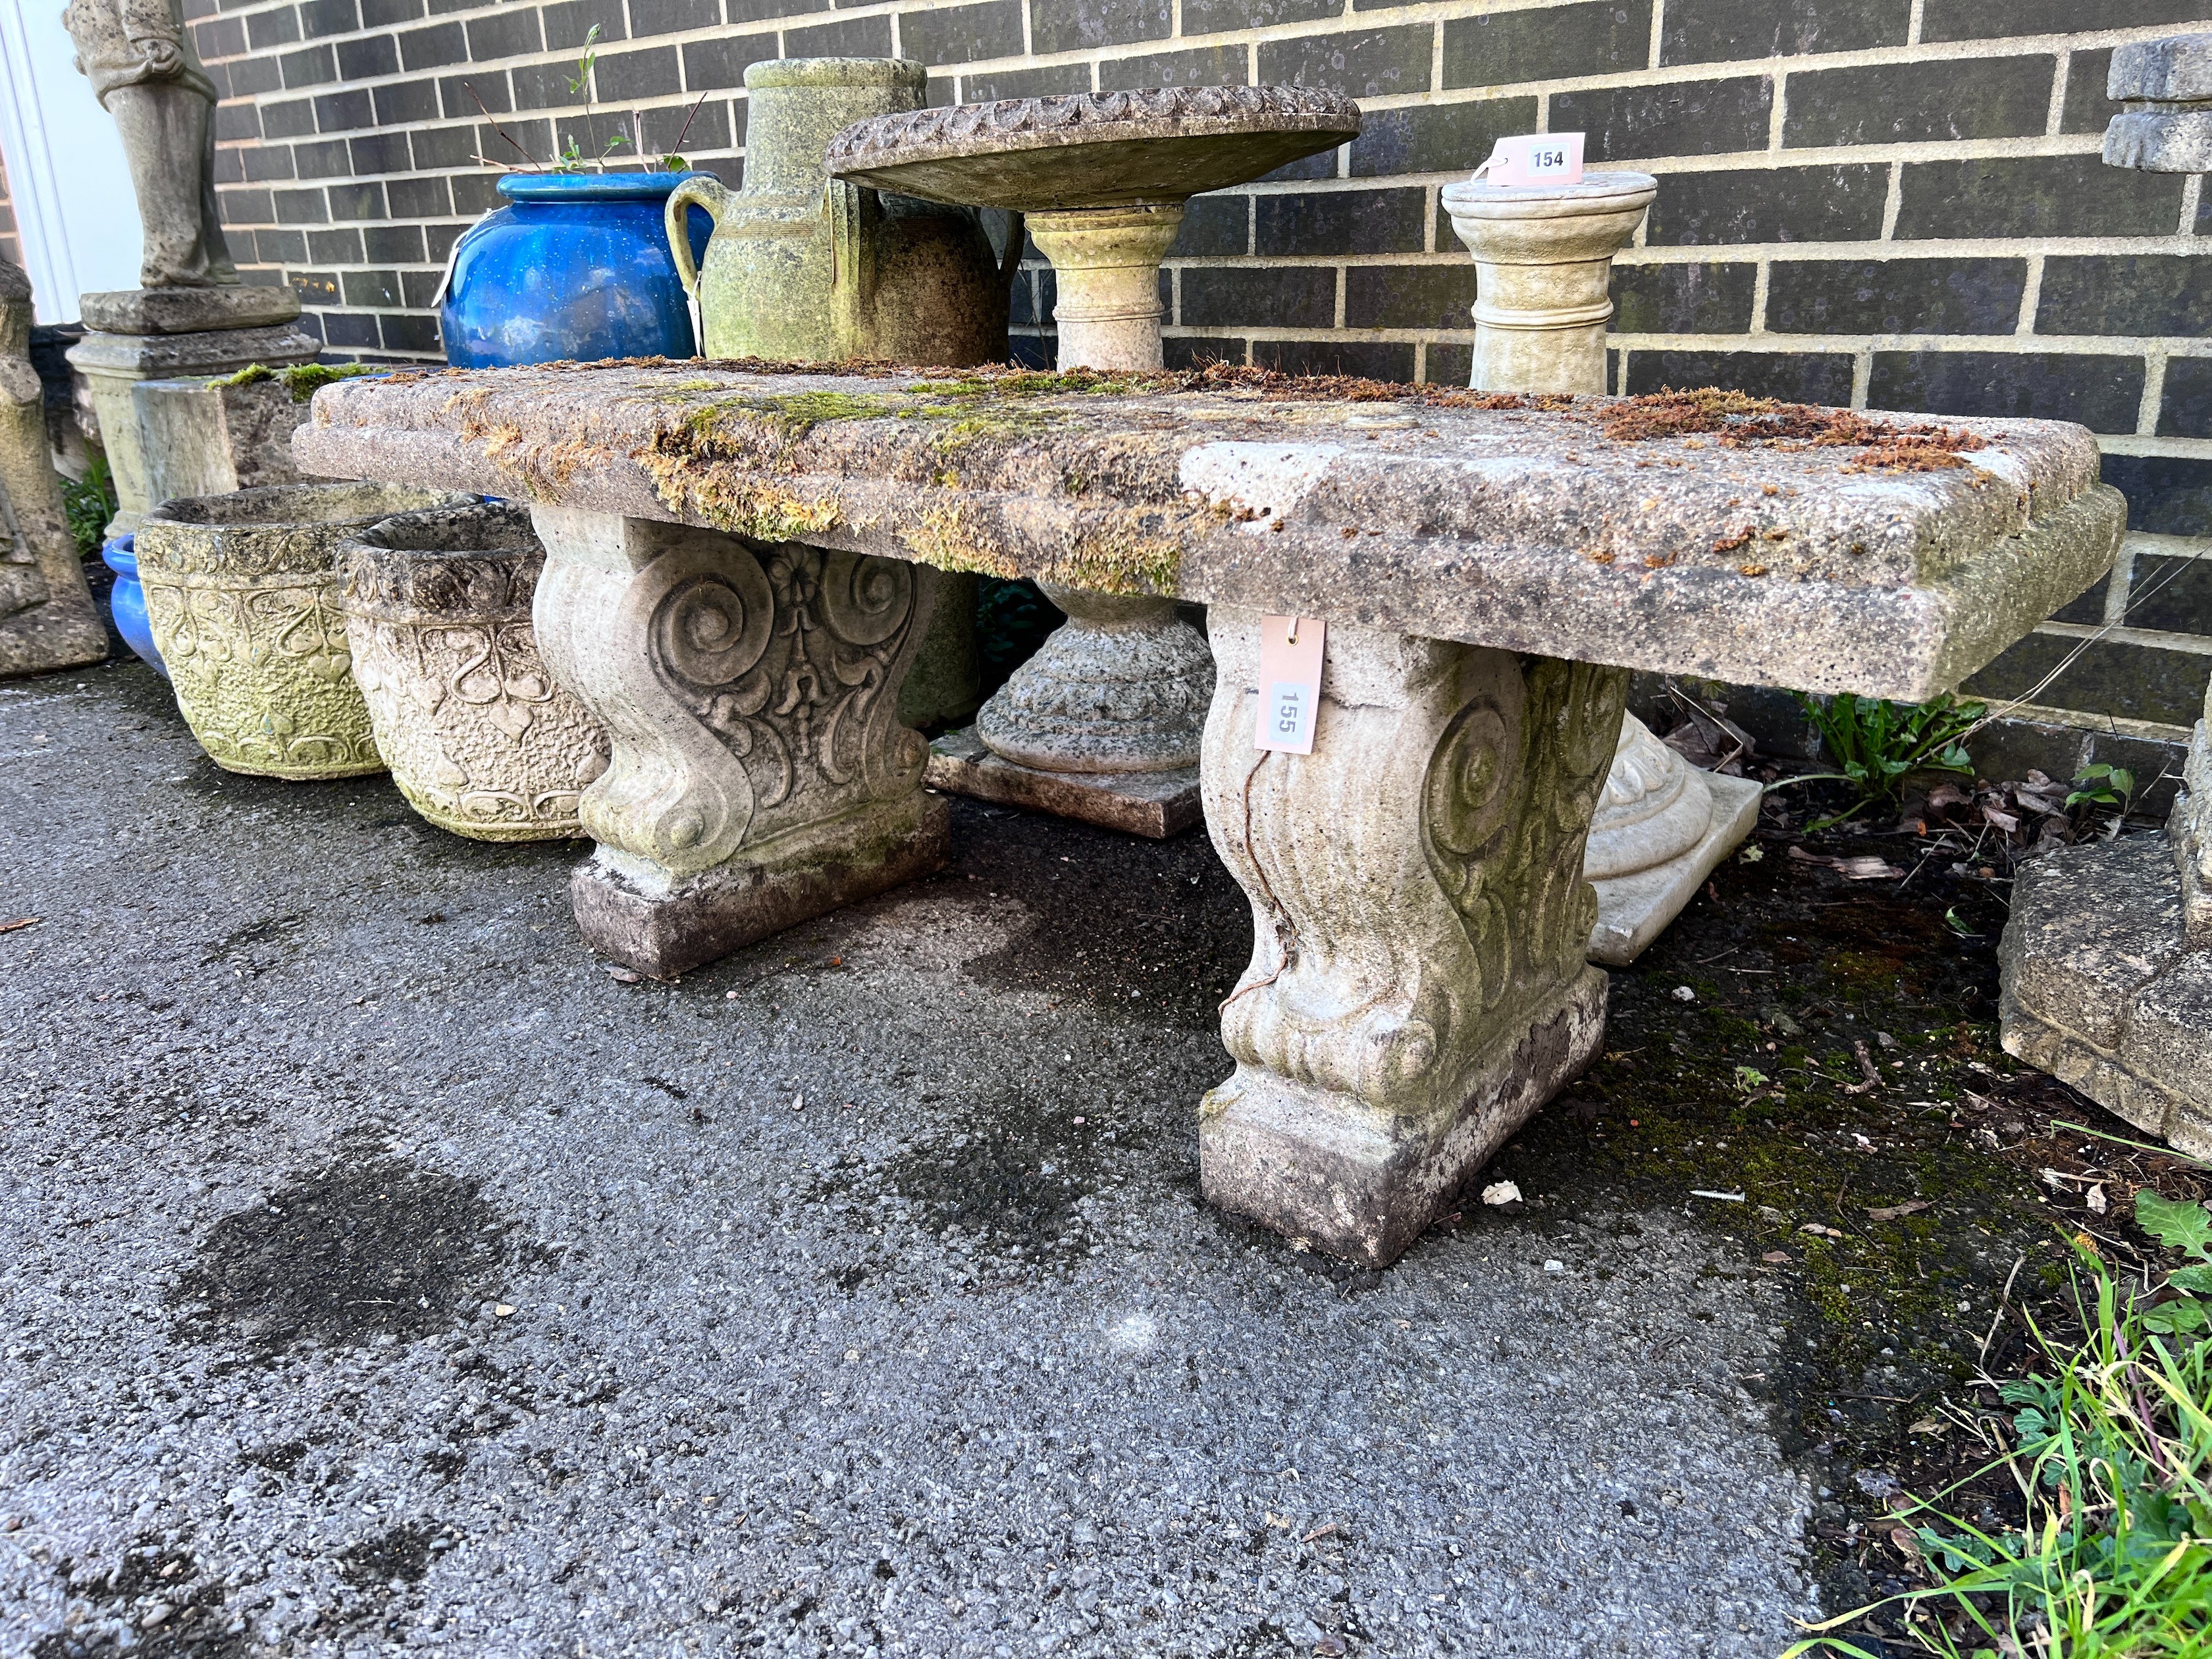 A reconstituted stone garden bench, length 128cm, depth 37cm, height 45cm *Please note the sale commences at 9am.